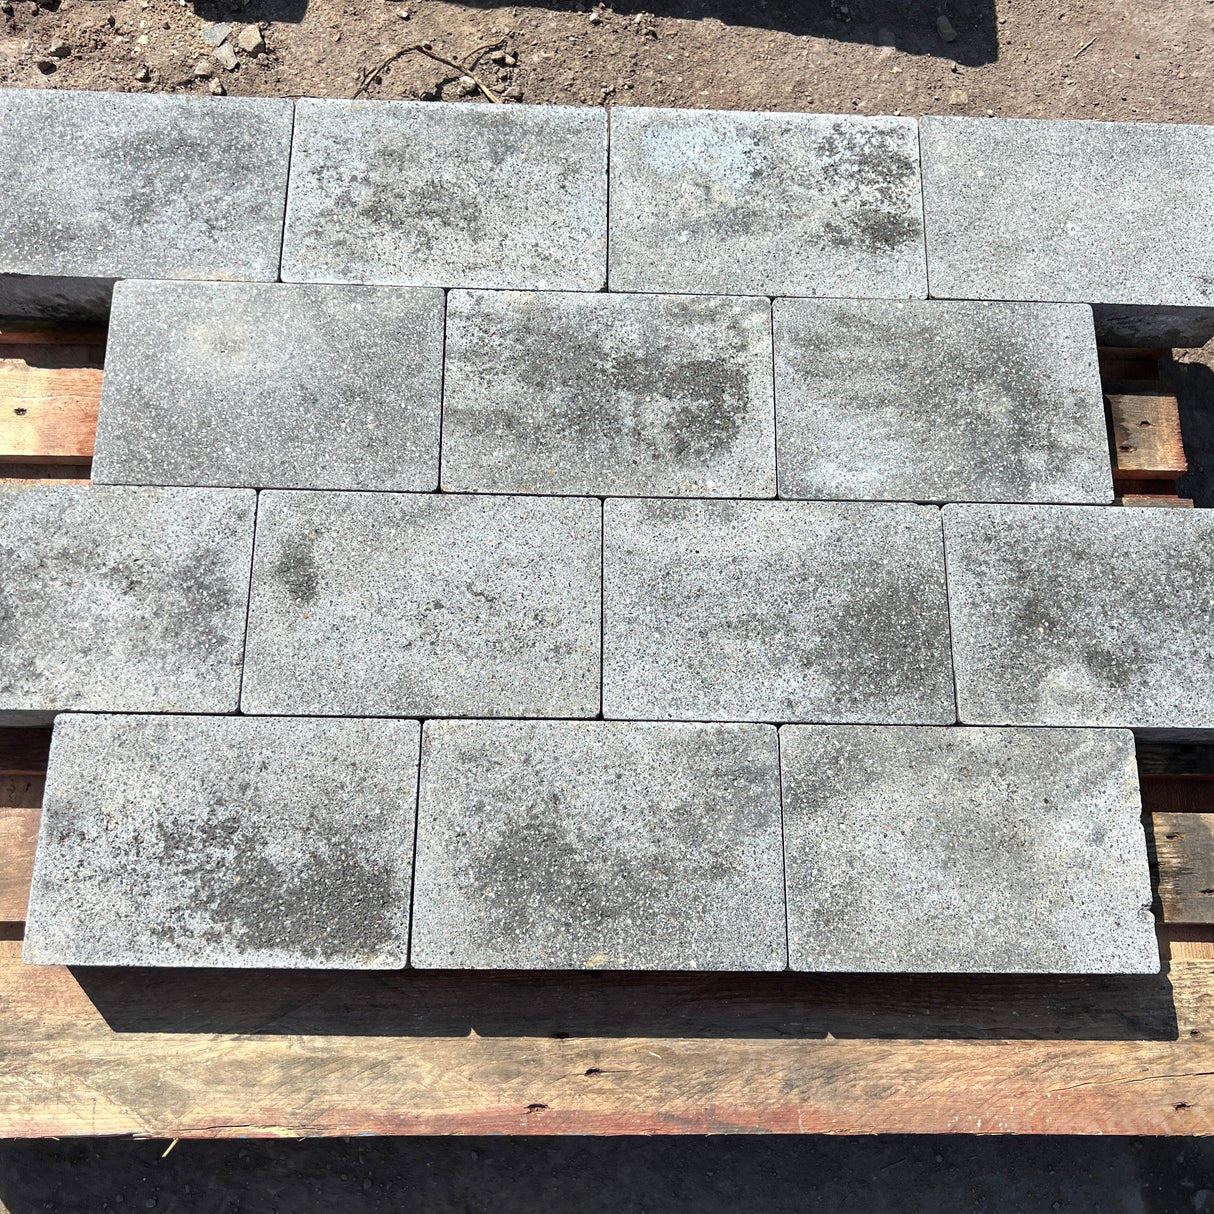 Commercial Paving Slabs - Reclaimed Brick Company